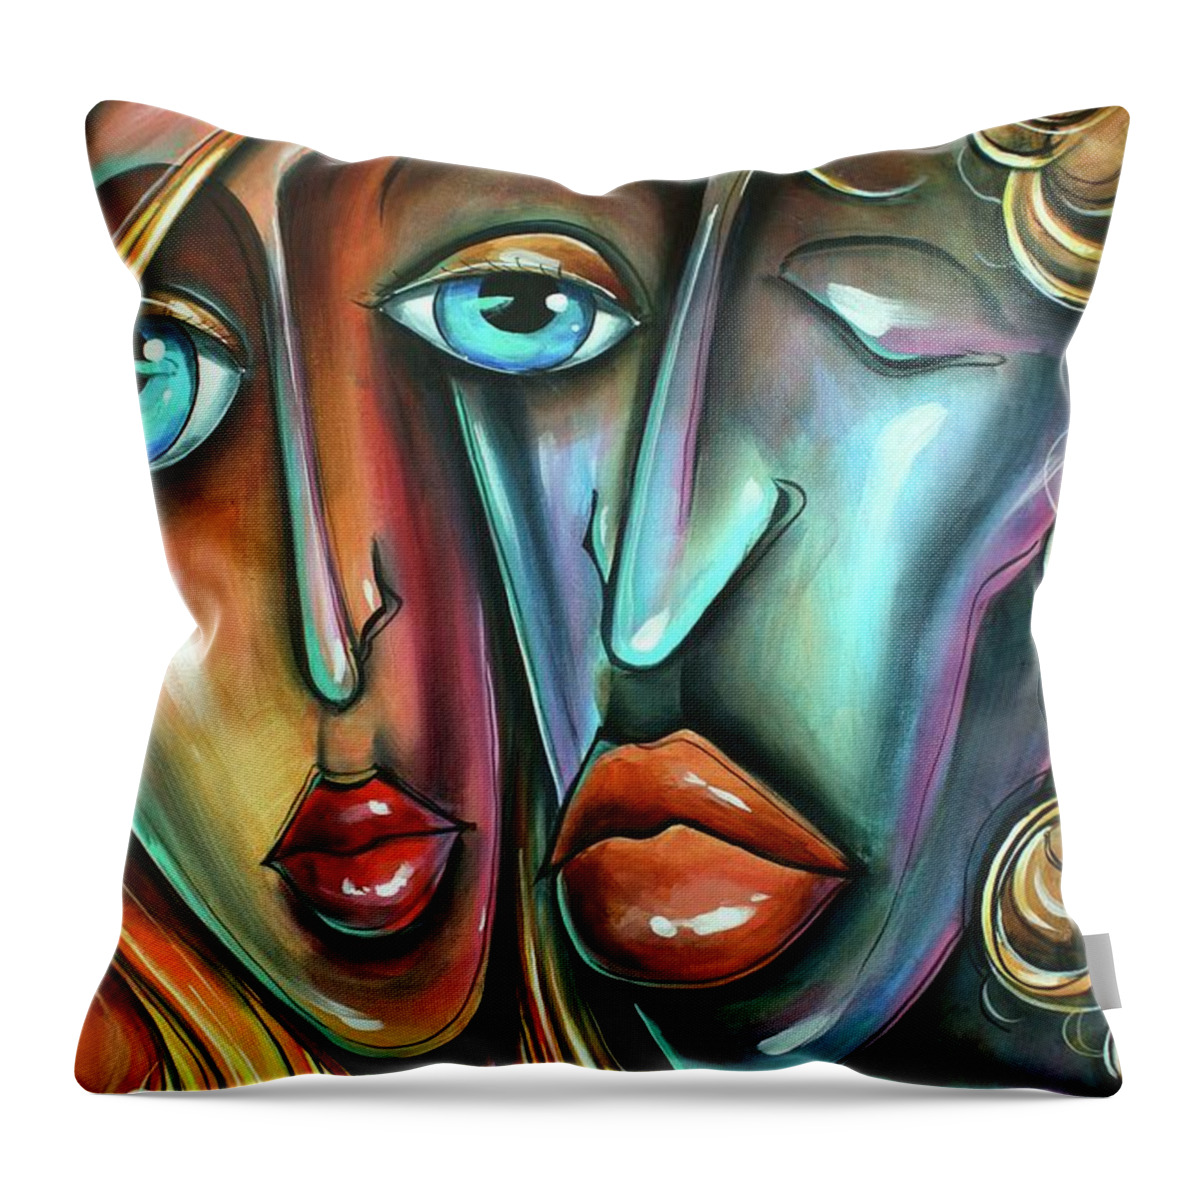 Urban Expression Throw Pillow featuring the painting Together by Michael Lang